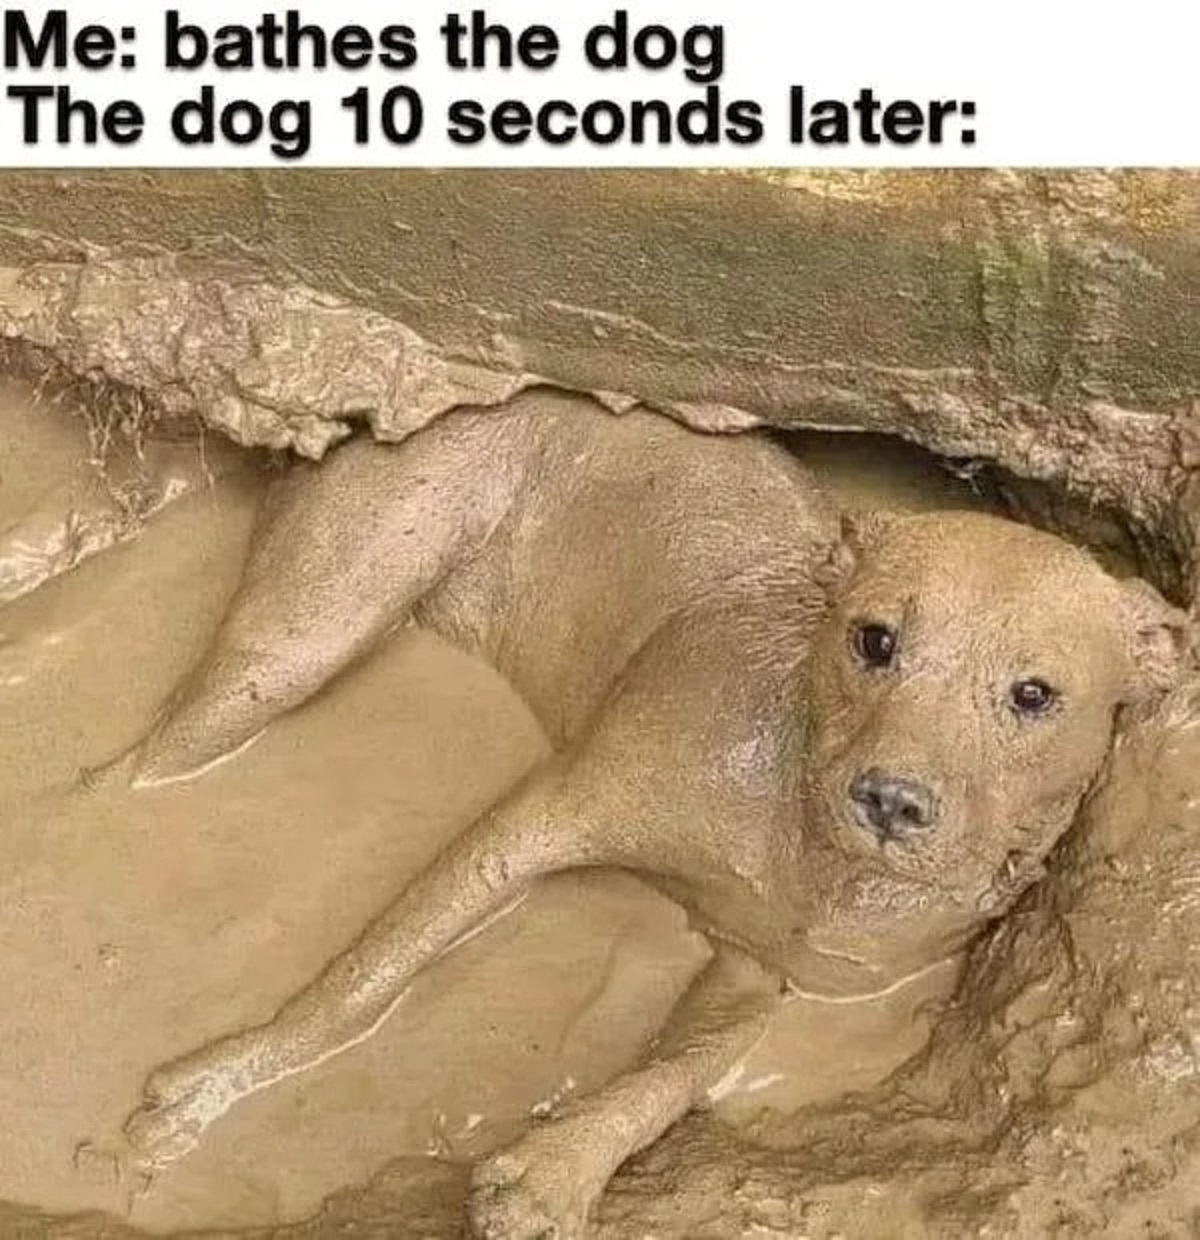 dogs if they were a peanut butter meme - Me bathes the dog The dog 10 seconds later